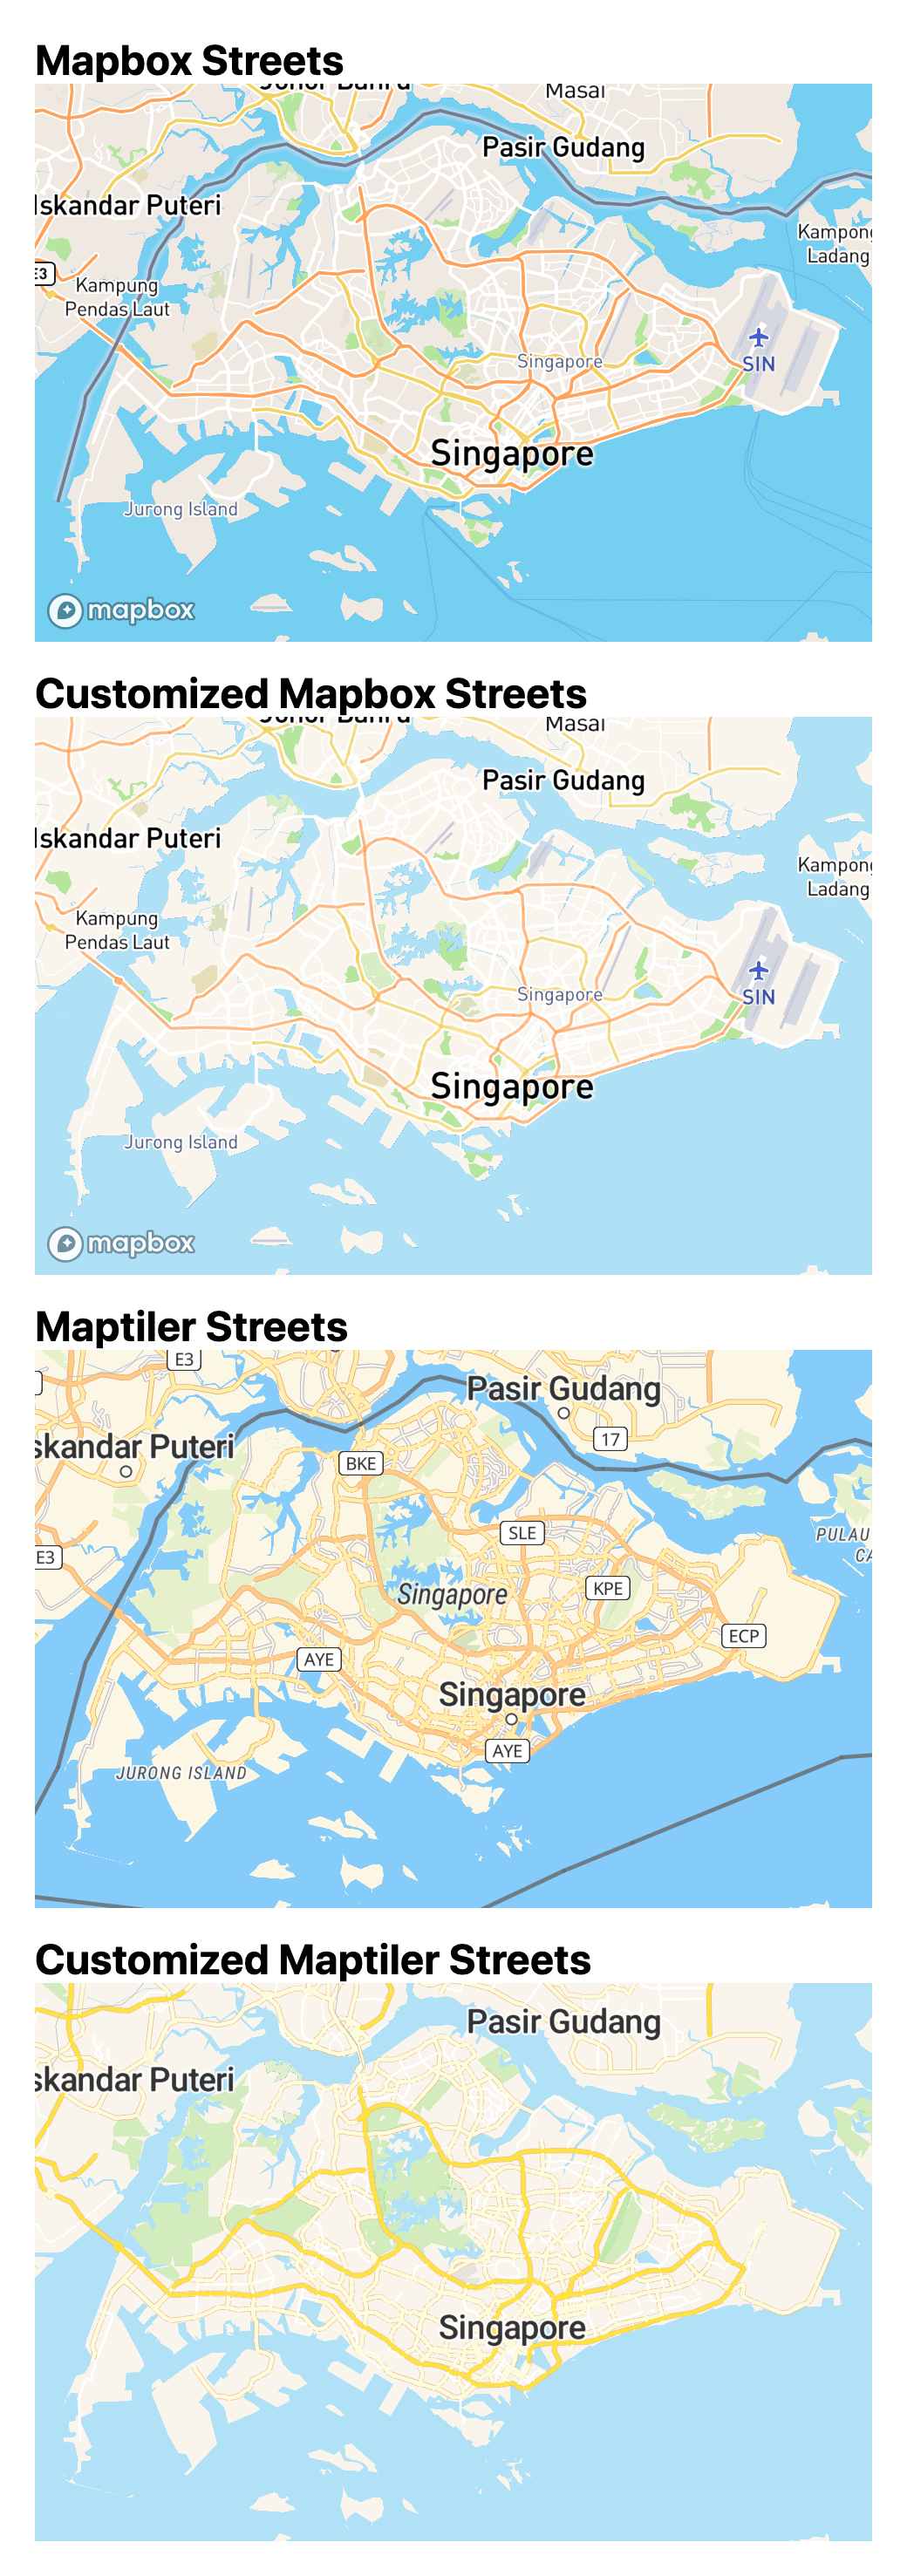 Vector tile styles for Mapbox Streets, customized Mapbox Streets, Maptiler Streets and customized Maptiler Streets